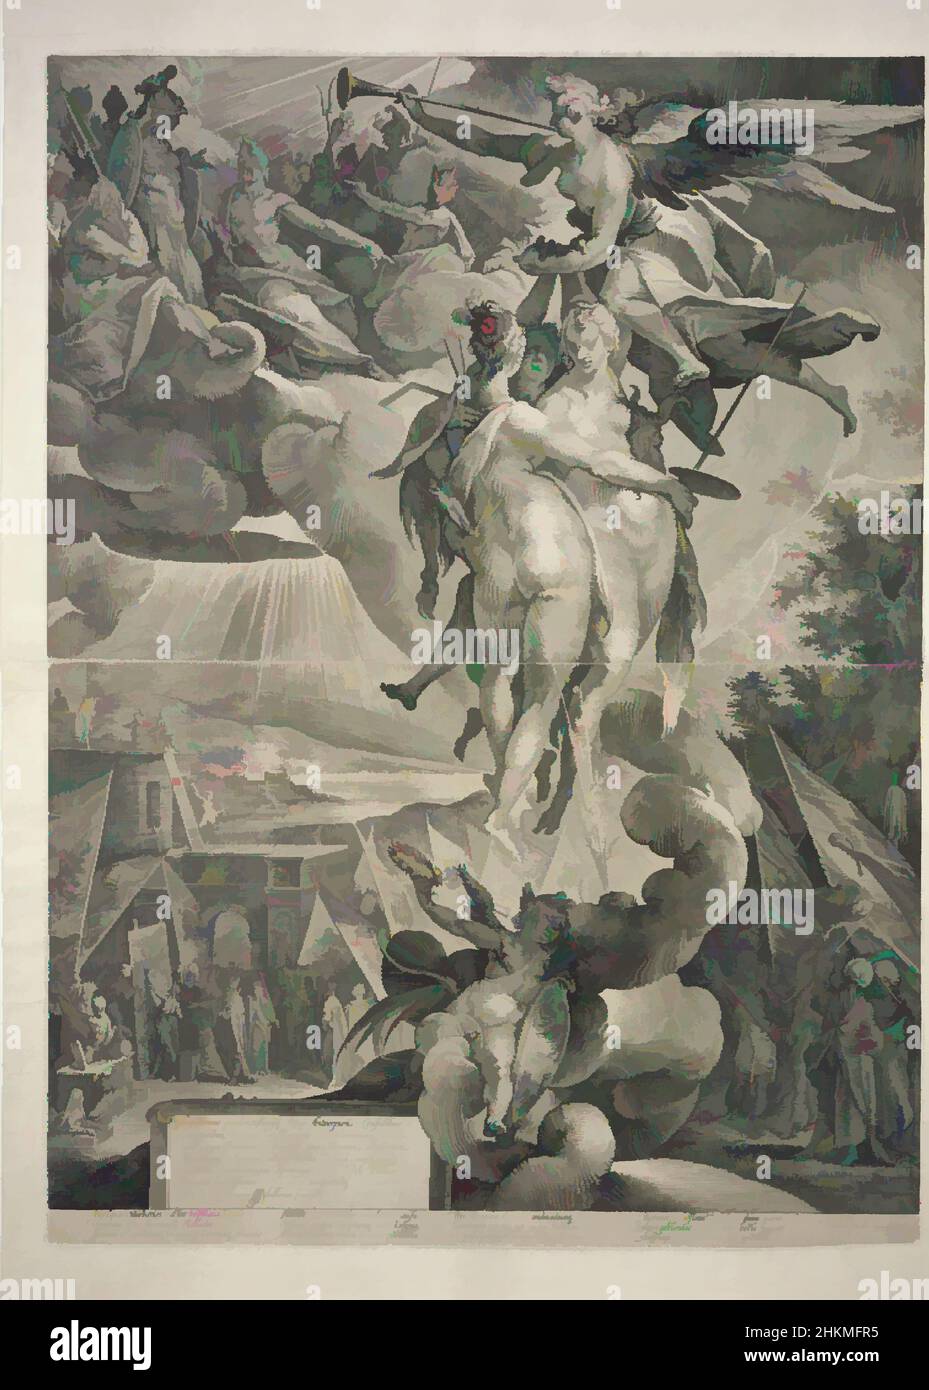 Art inspired by The Apotheosis of the Arts, Bartholomeus Spranger, Dutch, 1546-c.1611, Jan Harmensz Muller, Dutch, 1571-1628, 1597, Engraving, Antwerp, Belgium, Europe, Prague, Czech Republic, Europe, Prints, plate: 26 15/16 x 19 11/16 in. (68.5 x 50 cm, Classic works modernized by Artotop with a splash of modernity. Shapes, color and value, eye-catching visual impact on art. Emotions through freedom of artworks in a contemporary way. A timeless message pursuing a wildly creative new direction. Artists turning to the digital medium and creating the Artotop NFT Stock Photo